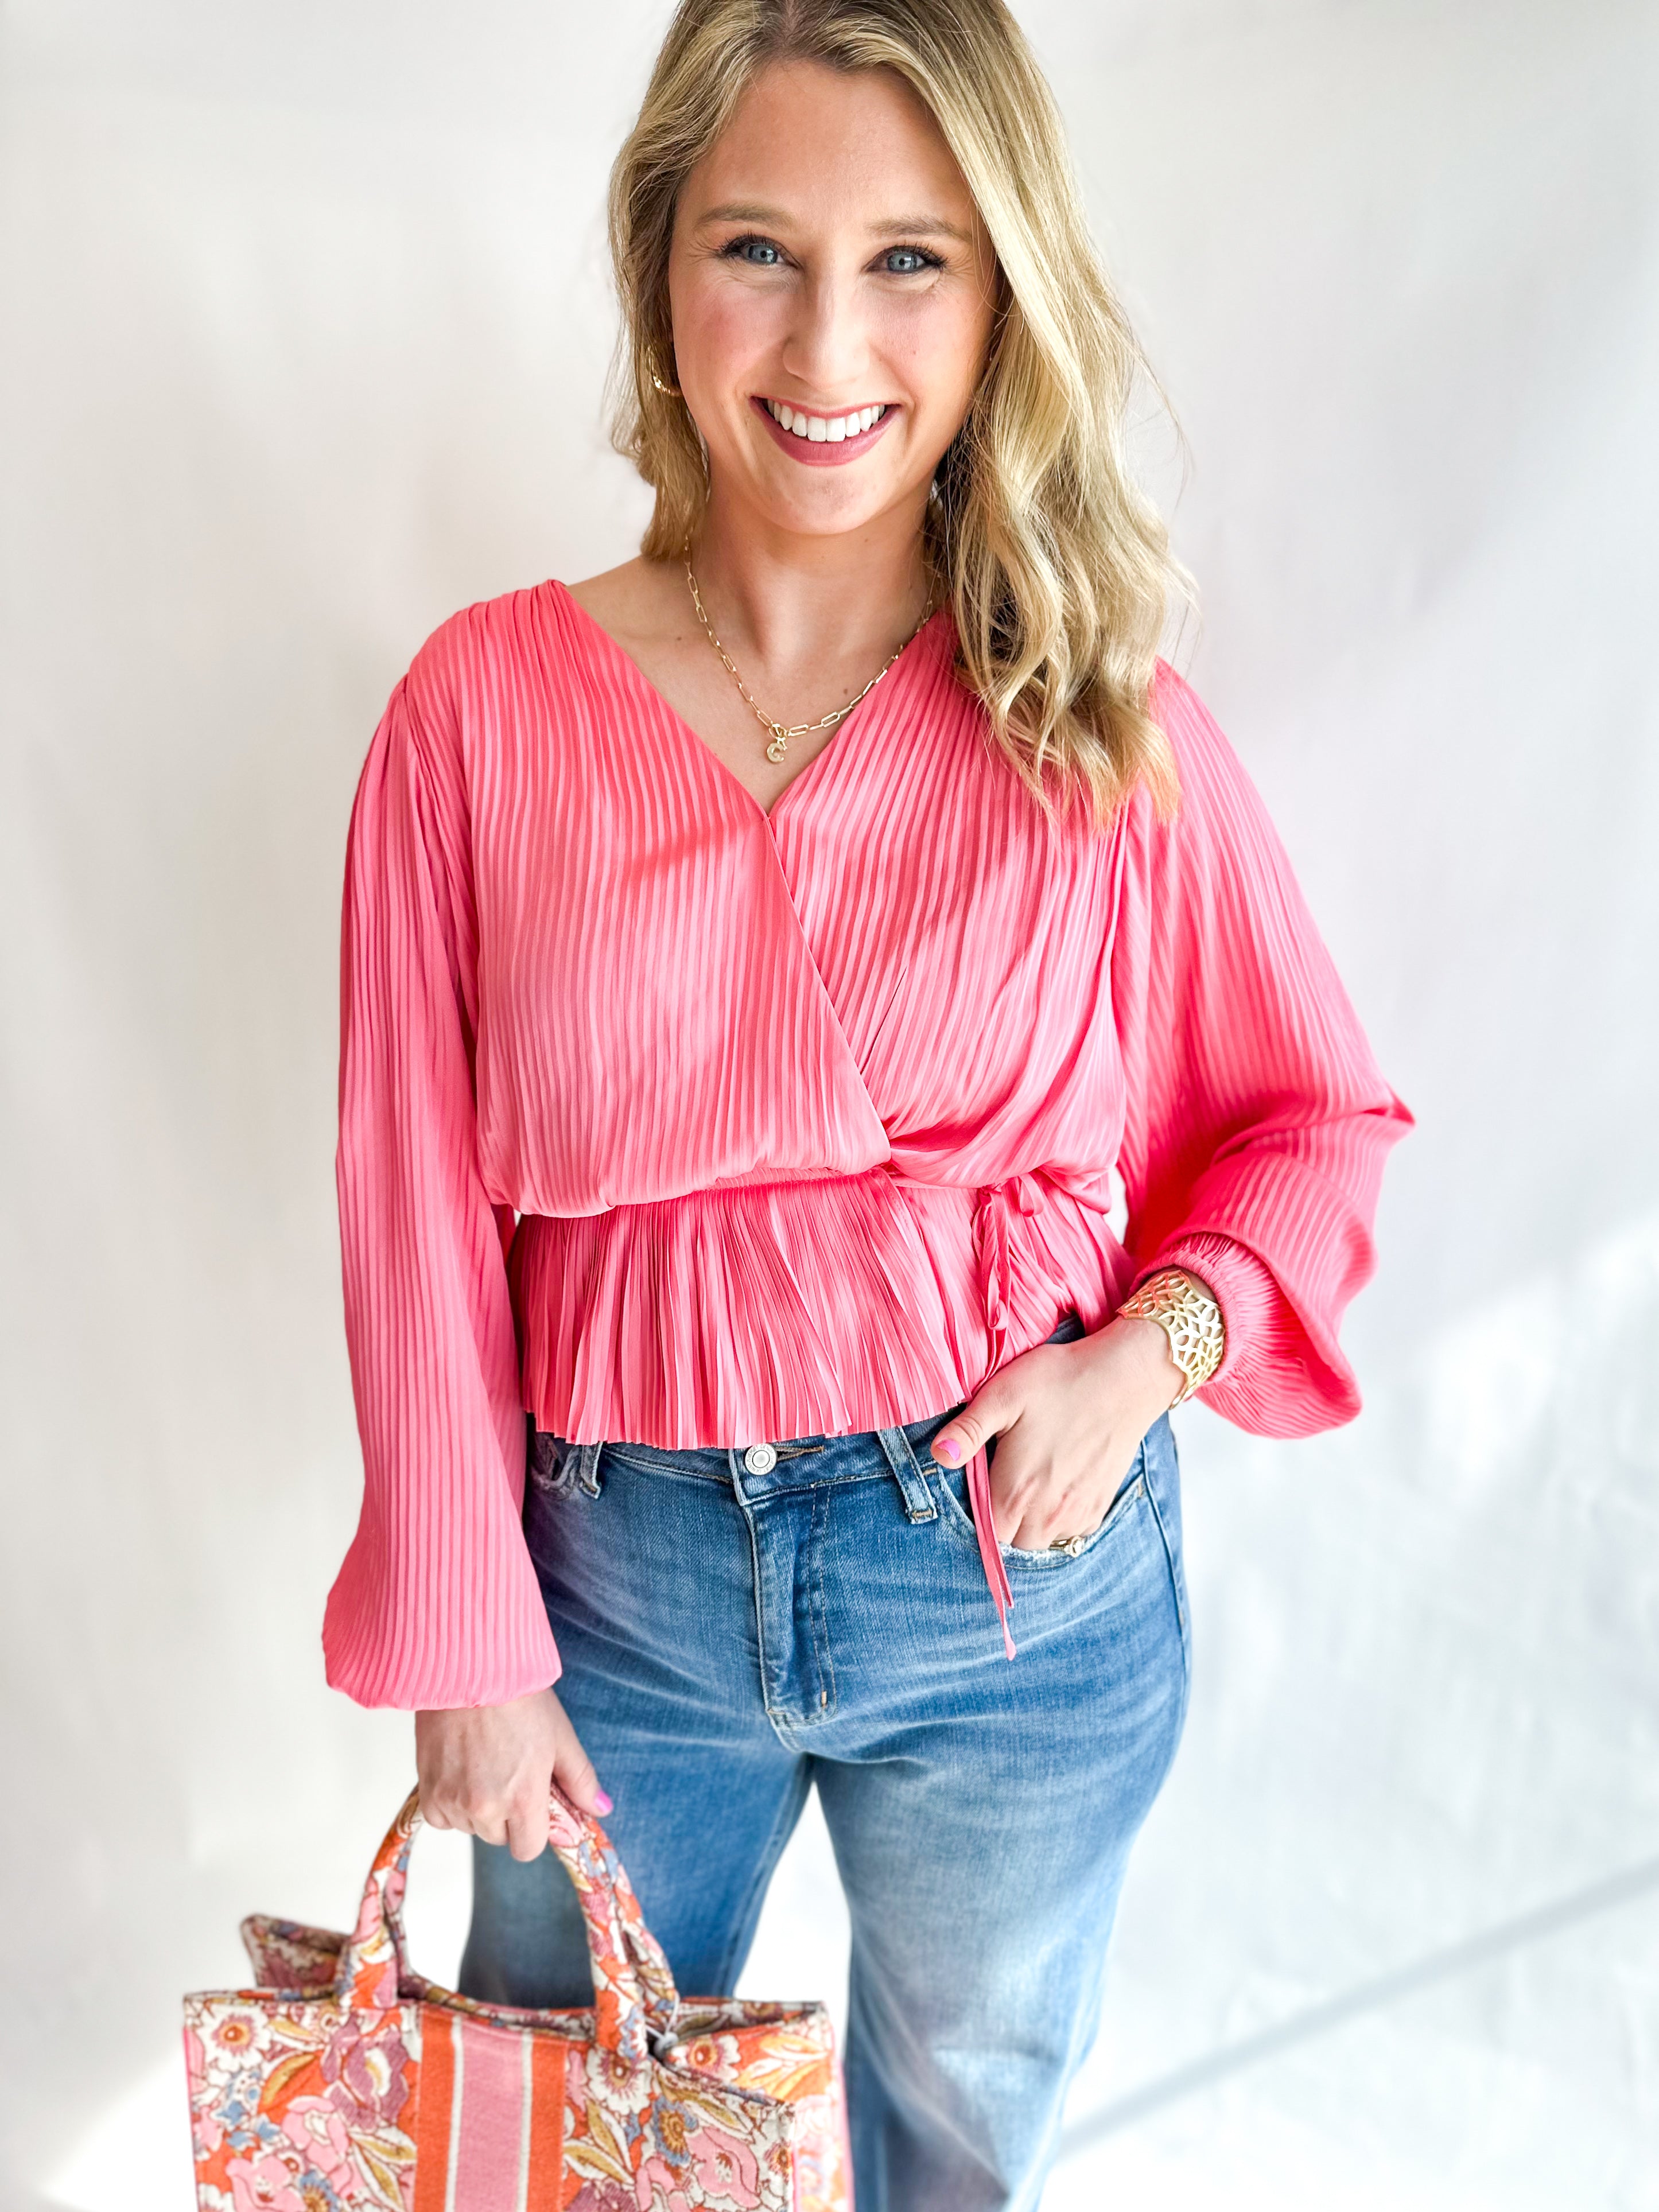 Brink Pink Pleated Blouse-200 Fashion Blouses-CURRENT AIR CLOTHING-July & June Women's Fashion Boutique Located in San Antonio, Texas